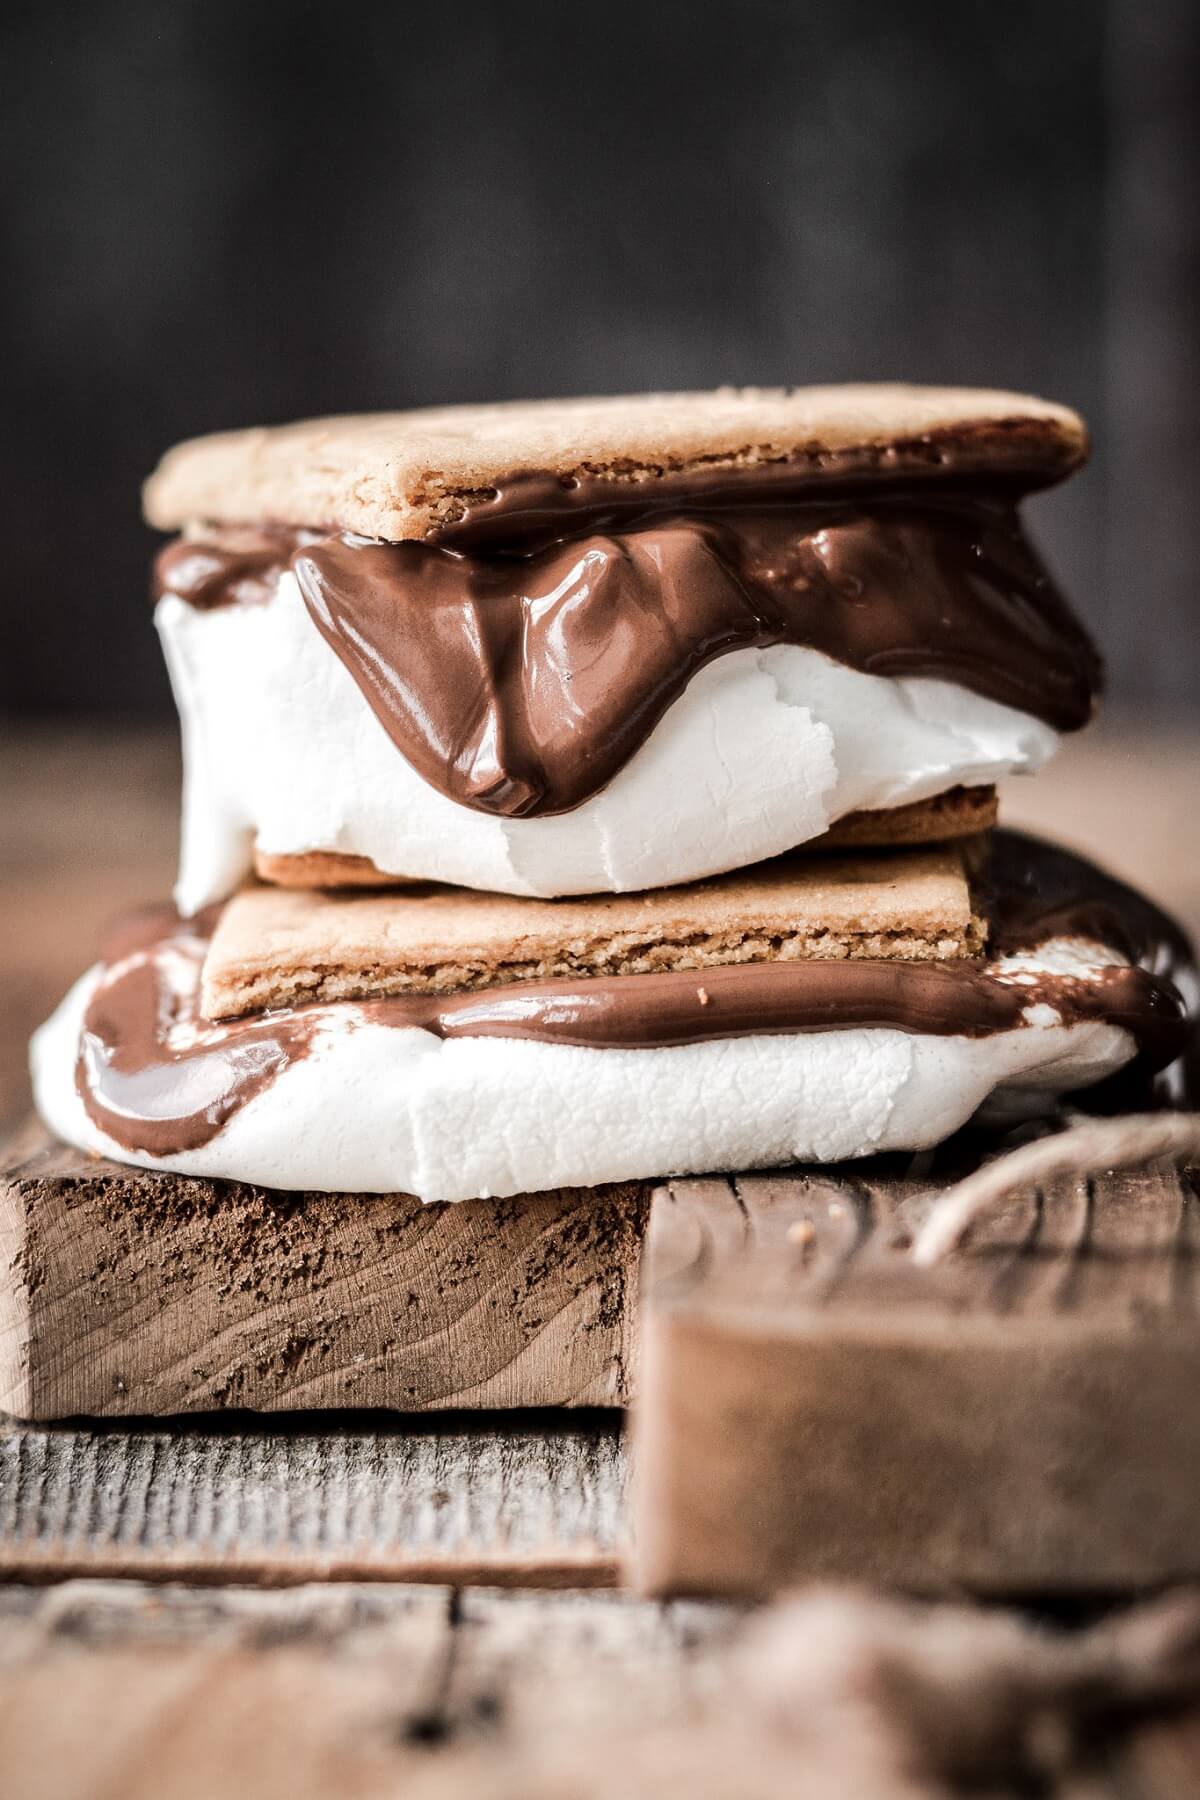 S'mores with dripping chocolate.